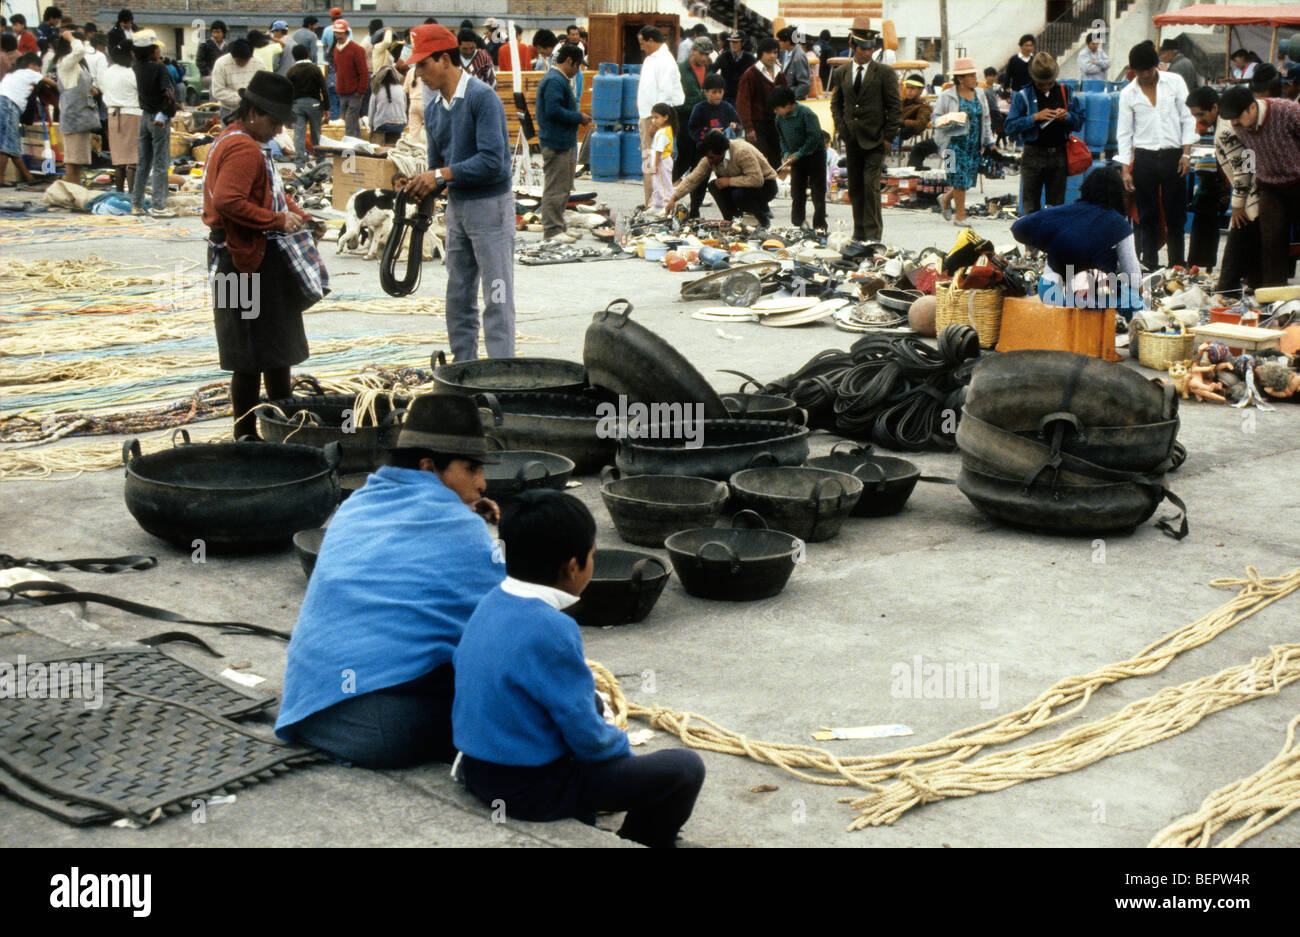 Large baskets made from recycled car tires for sale in Ecuador market. Stock Photo